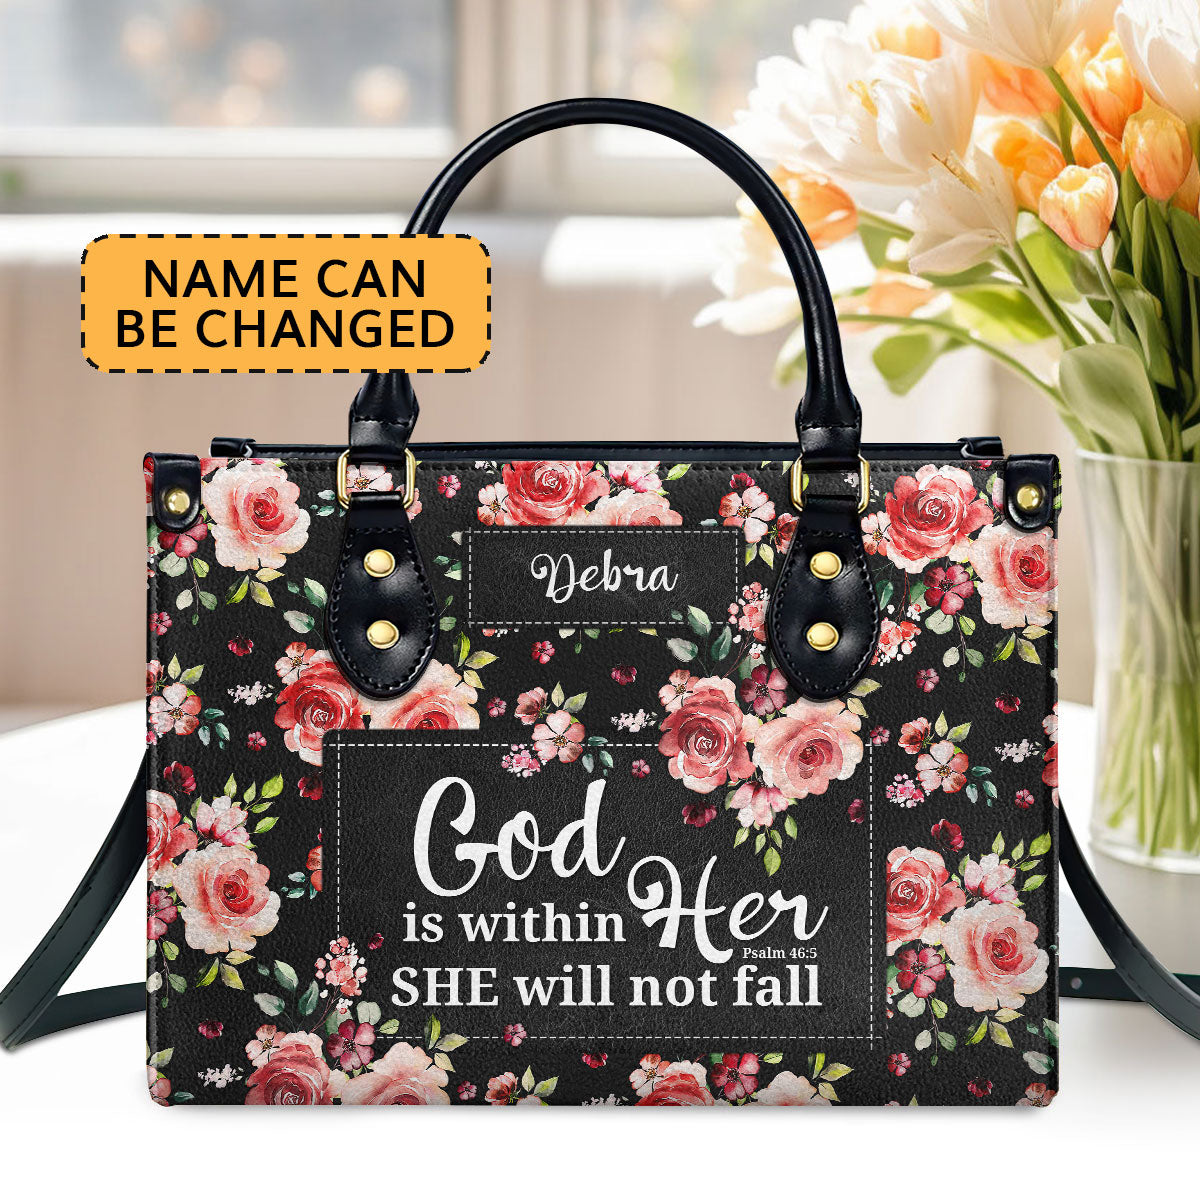 Spiritual Gift For Christian Ladies Psalm 465 God Is Within Her, She Will Not Fall Personalized Leather Handbag With Handle